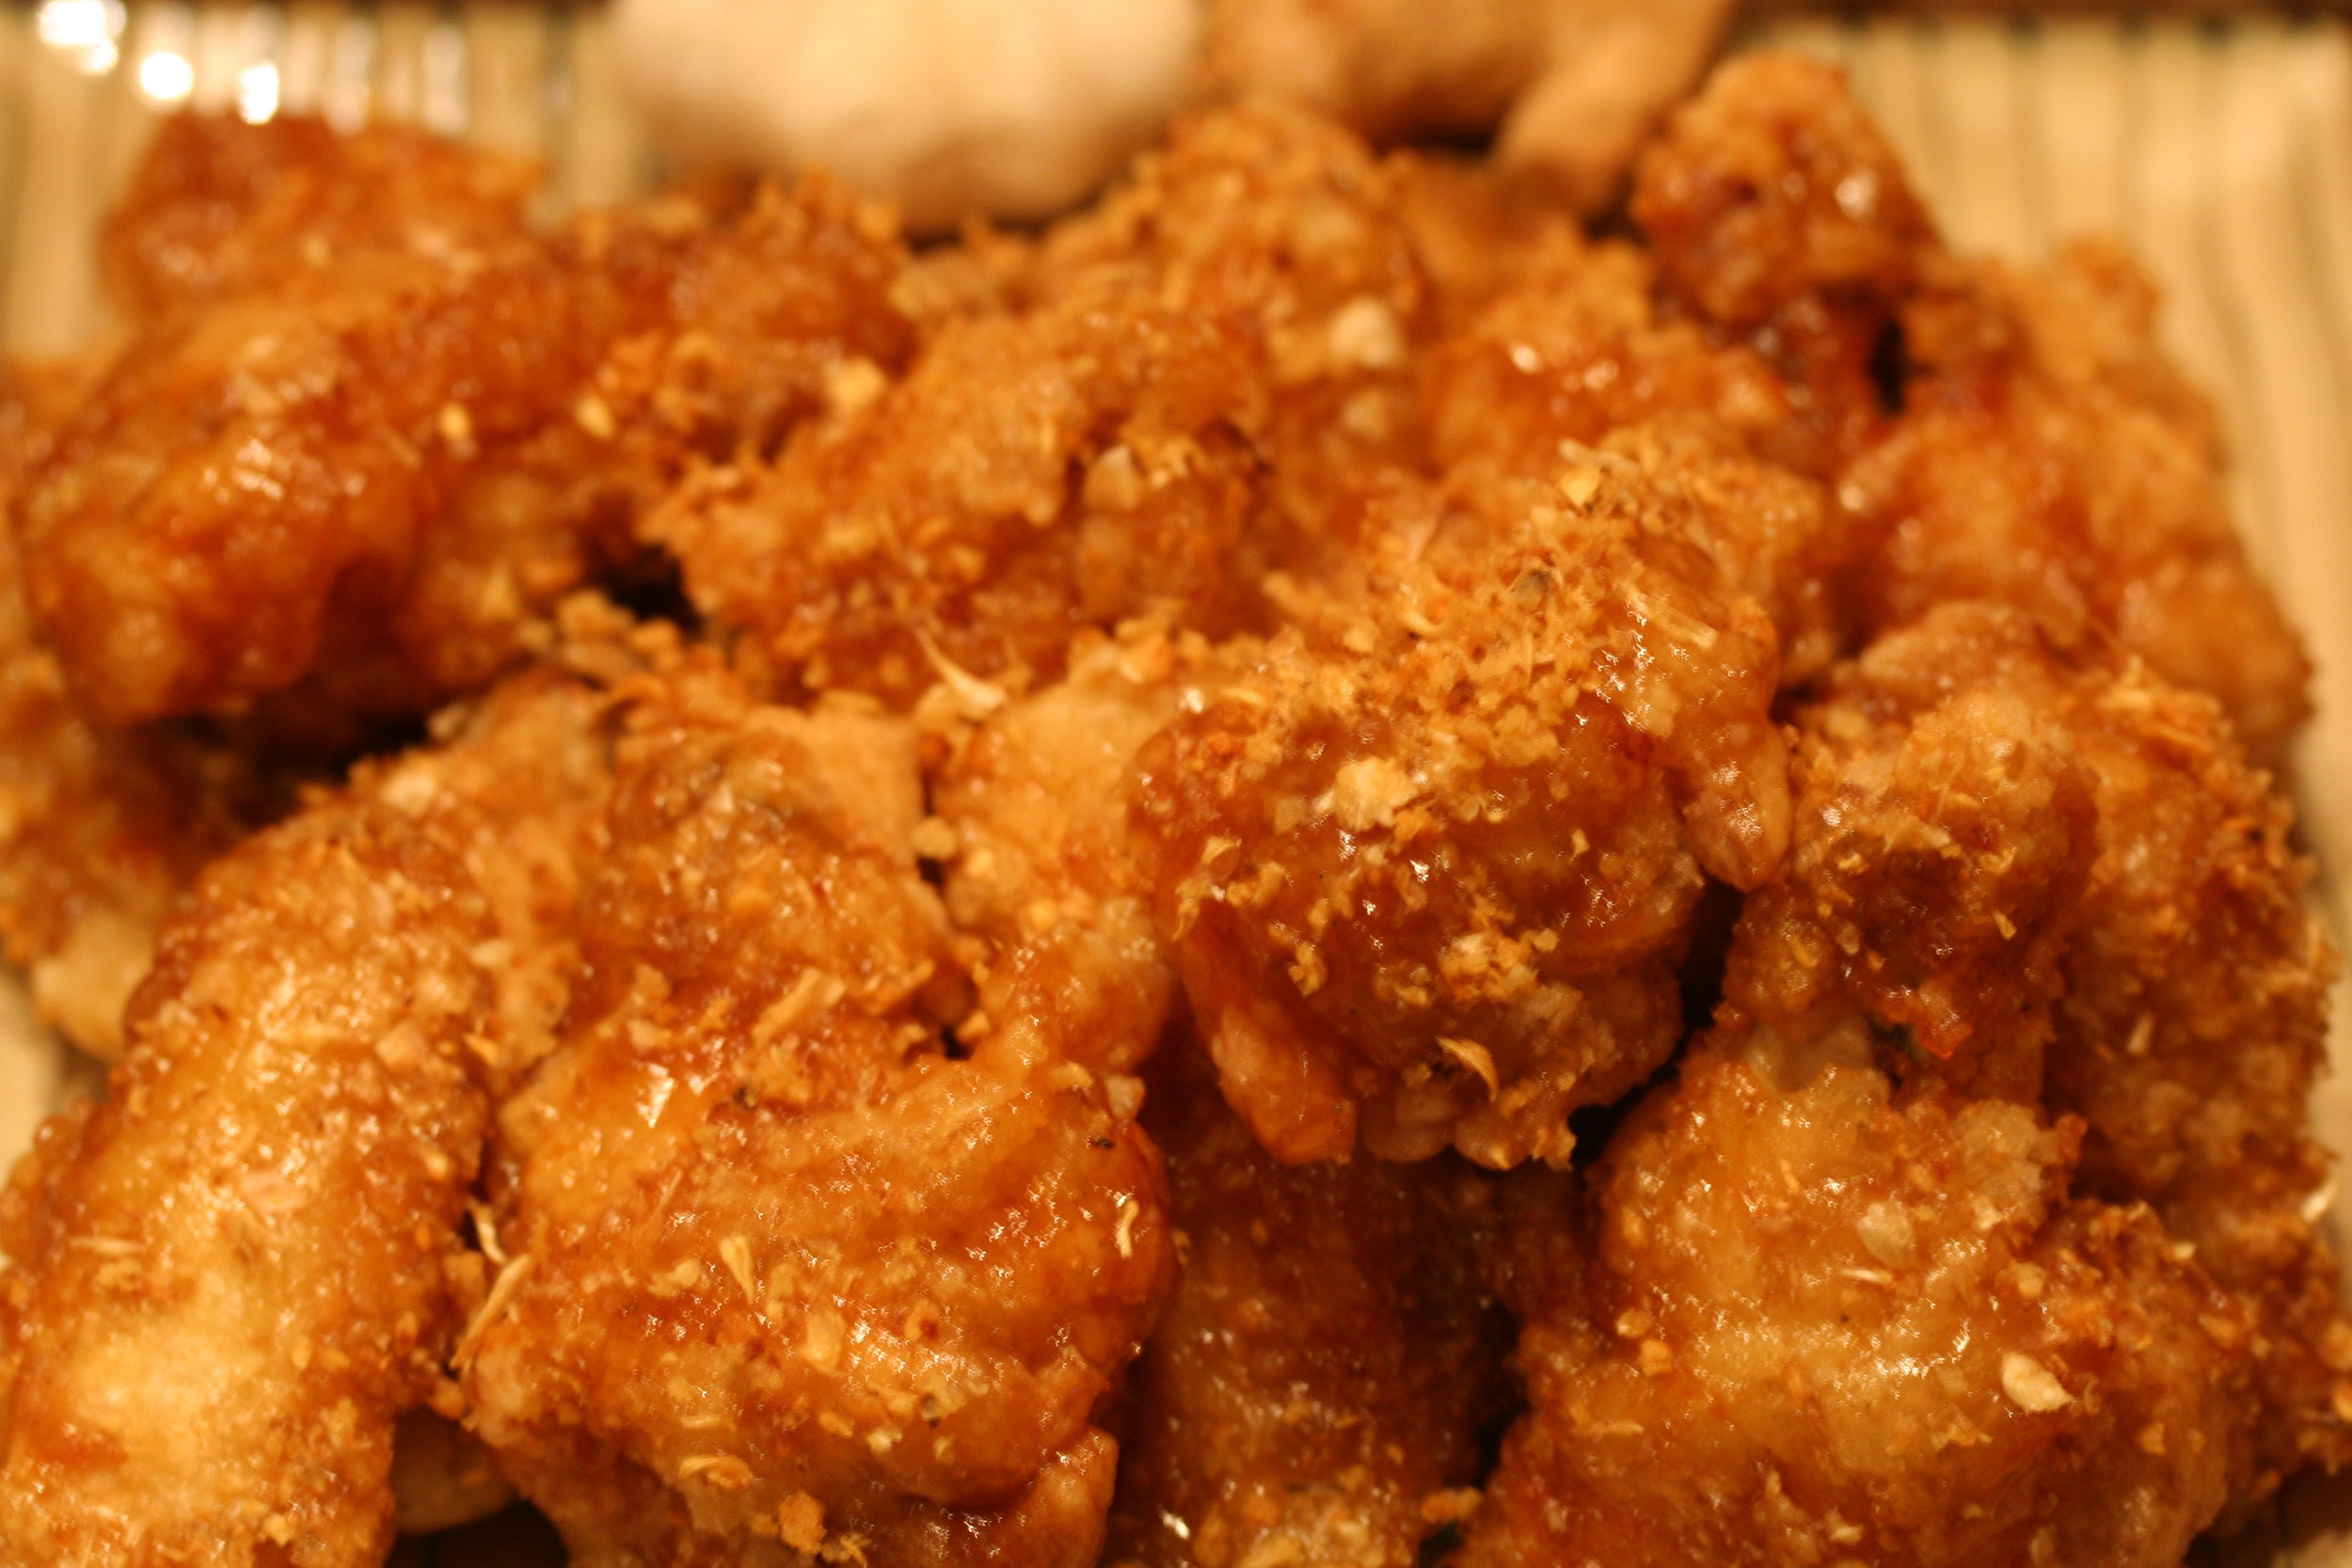 Bonchon style chicken wings